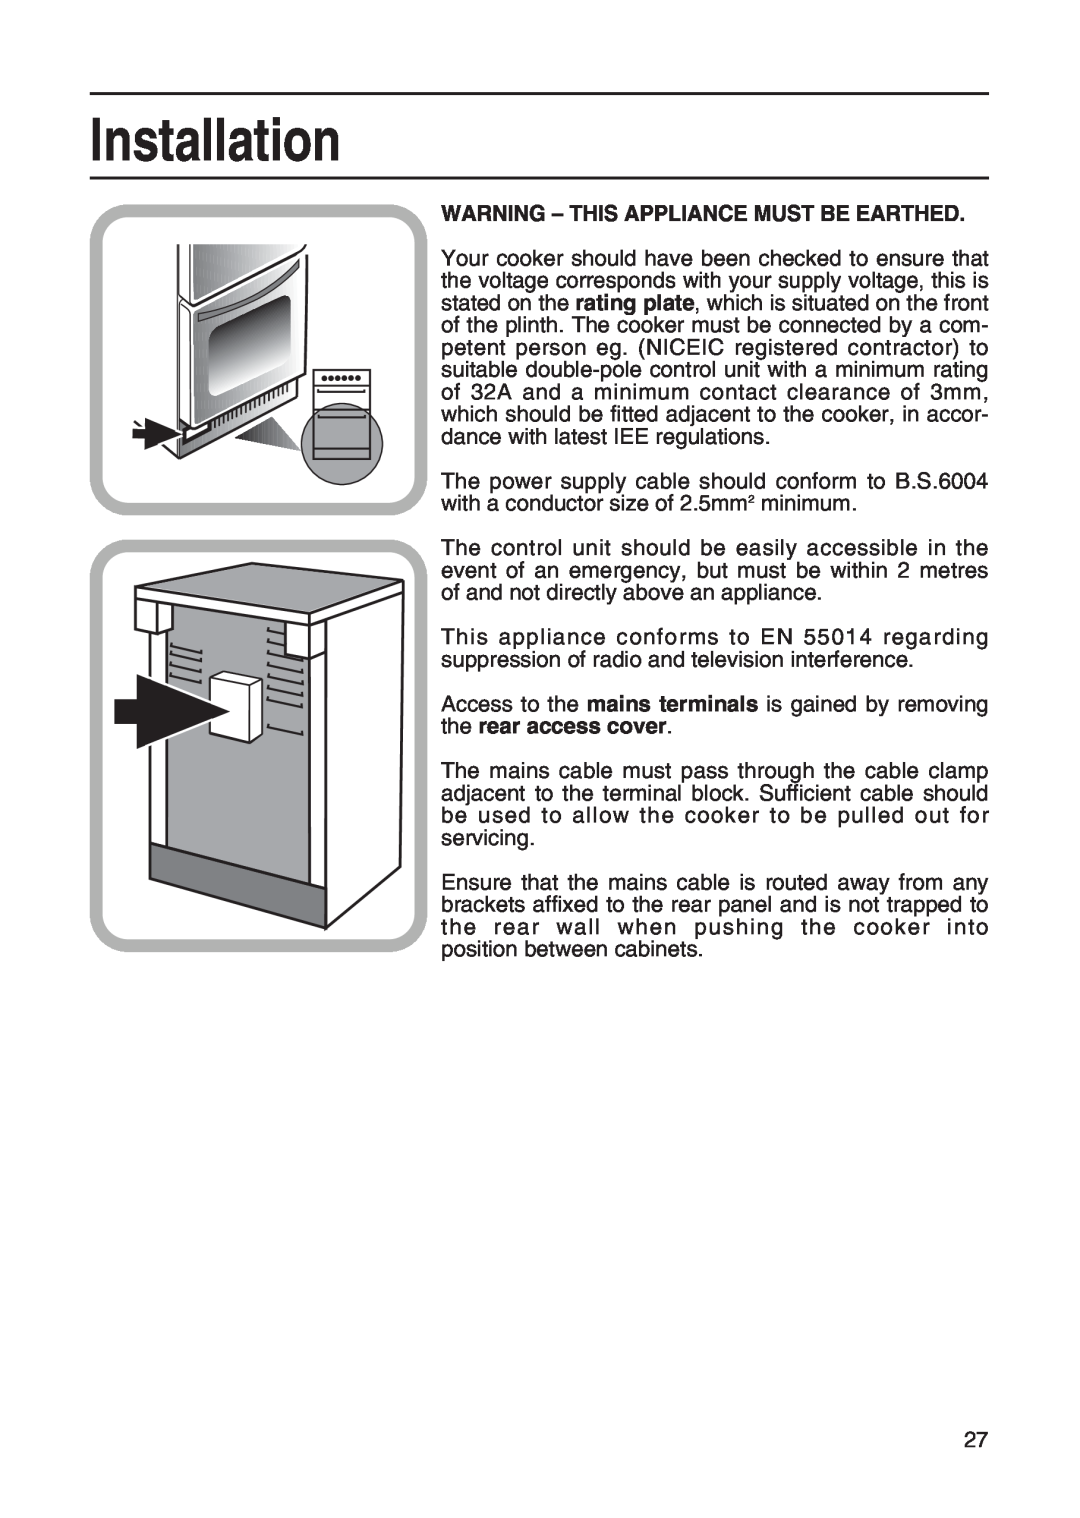 Hotpoint EG20, EG21 & EG22 manual Installation, Warning - This Appliance Must Be Earthed 